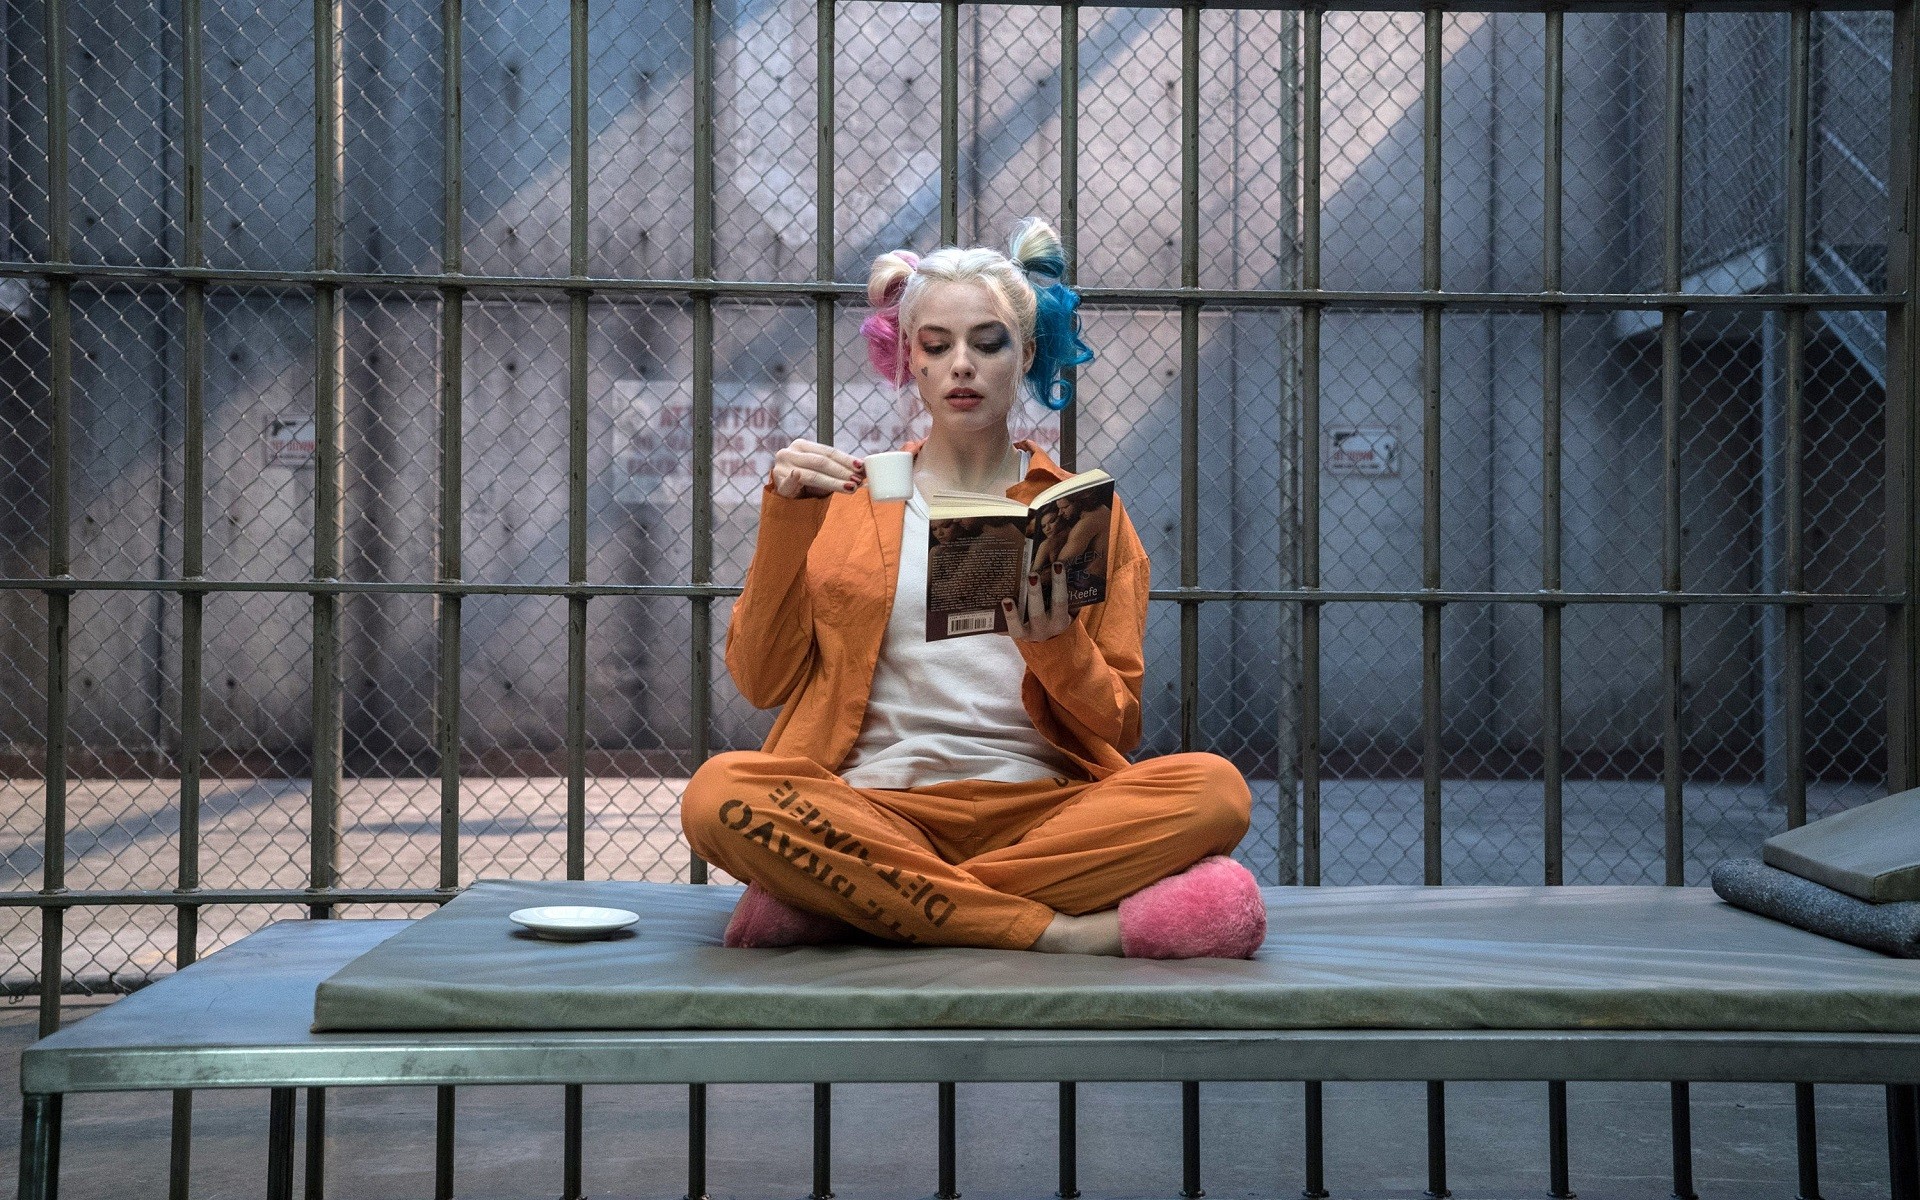 Margot Robbie Harley Quinn Suicide Squad Movies Women Blonde Actress Dyed Hair Twintails Prison Pris 1920x1200